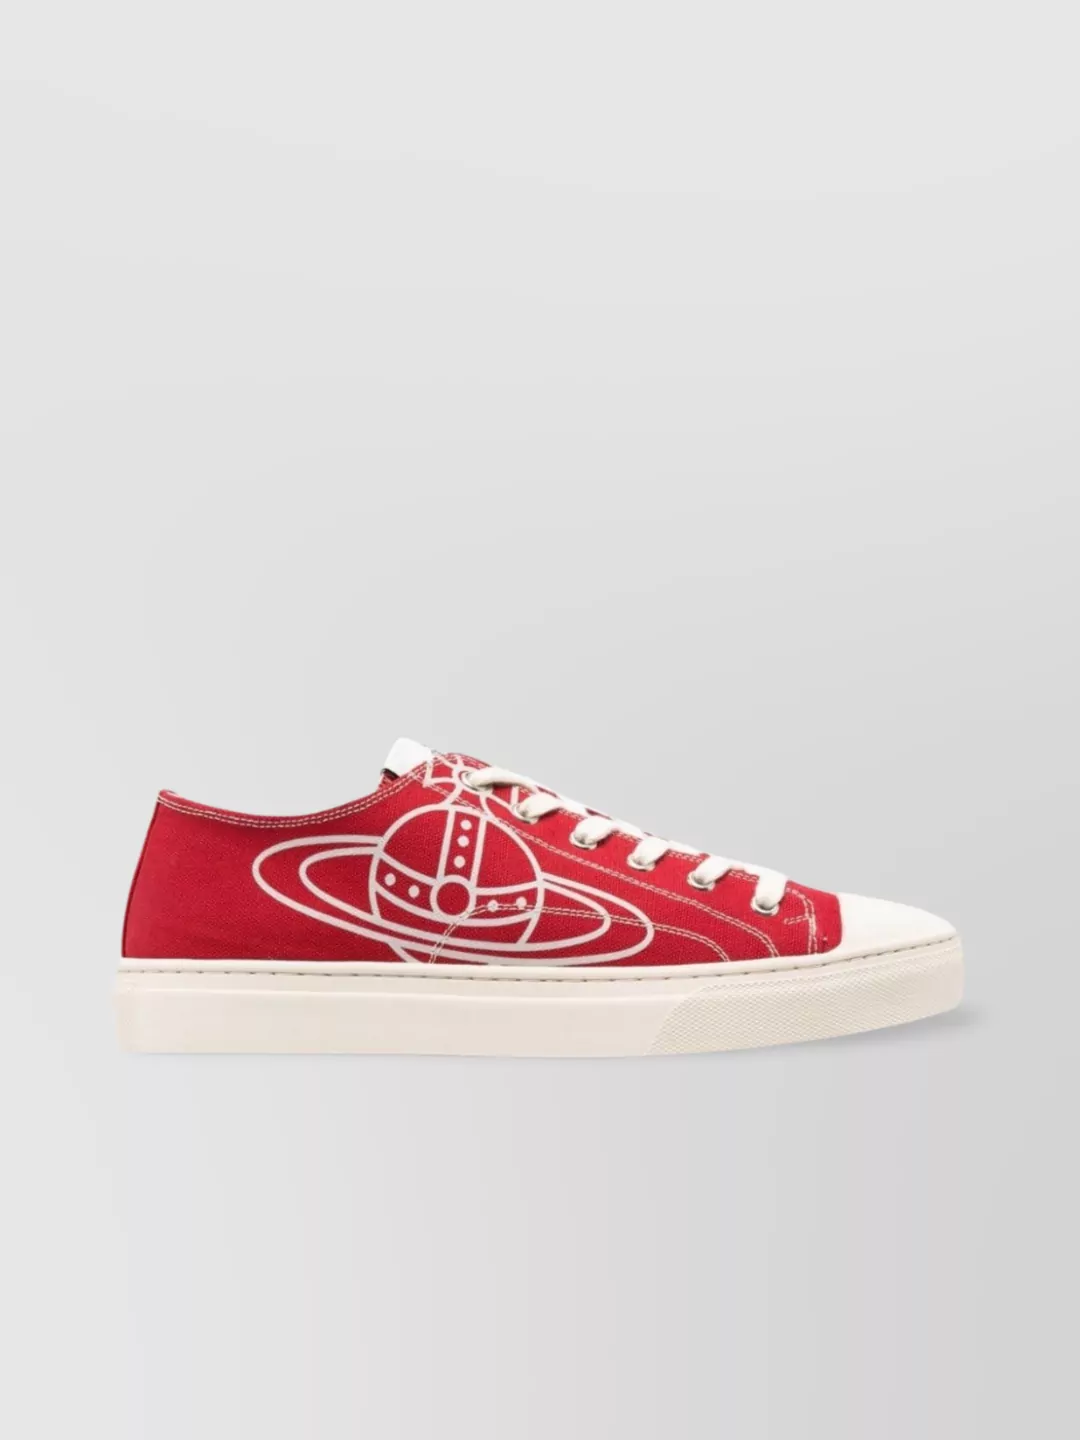 Shop Vivienne Westwood Canvas Sneakers With Round Toe And Rubber Sole In Burgundy